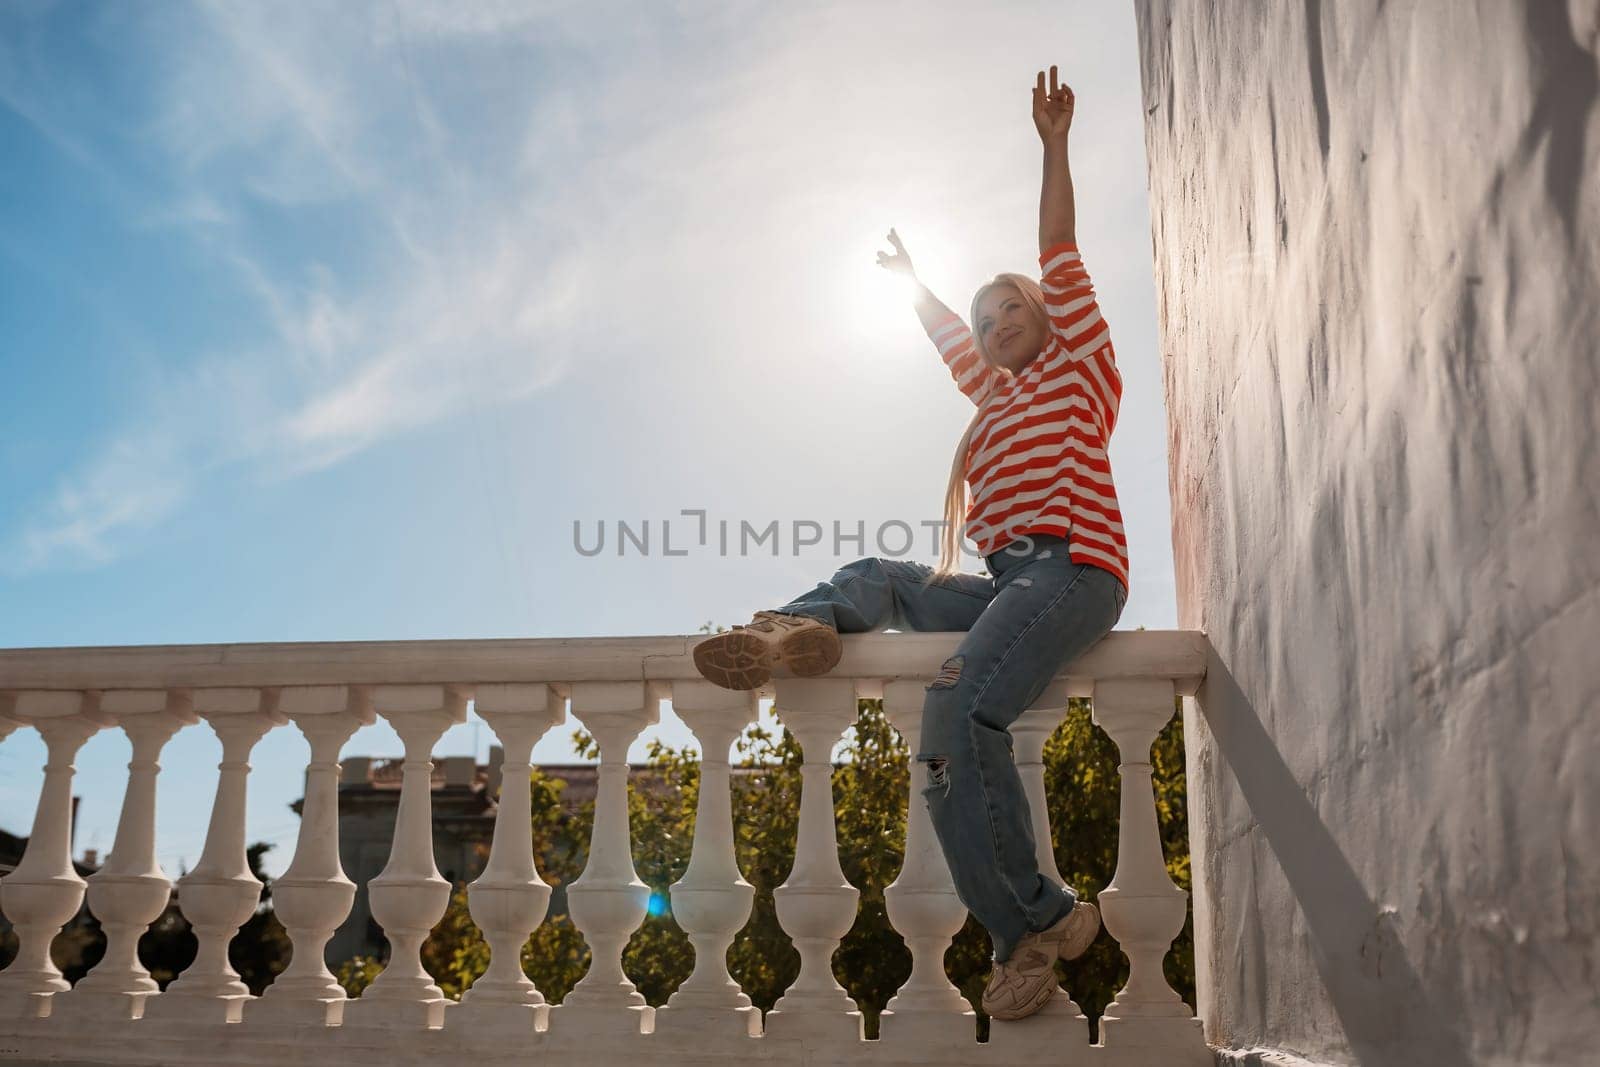 A woman is sitting on a railing with her arms raised in the air. The sun is shining brightly, creating a warm and inviting atmosphere